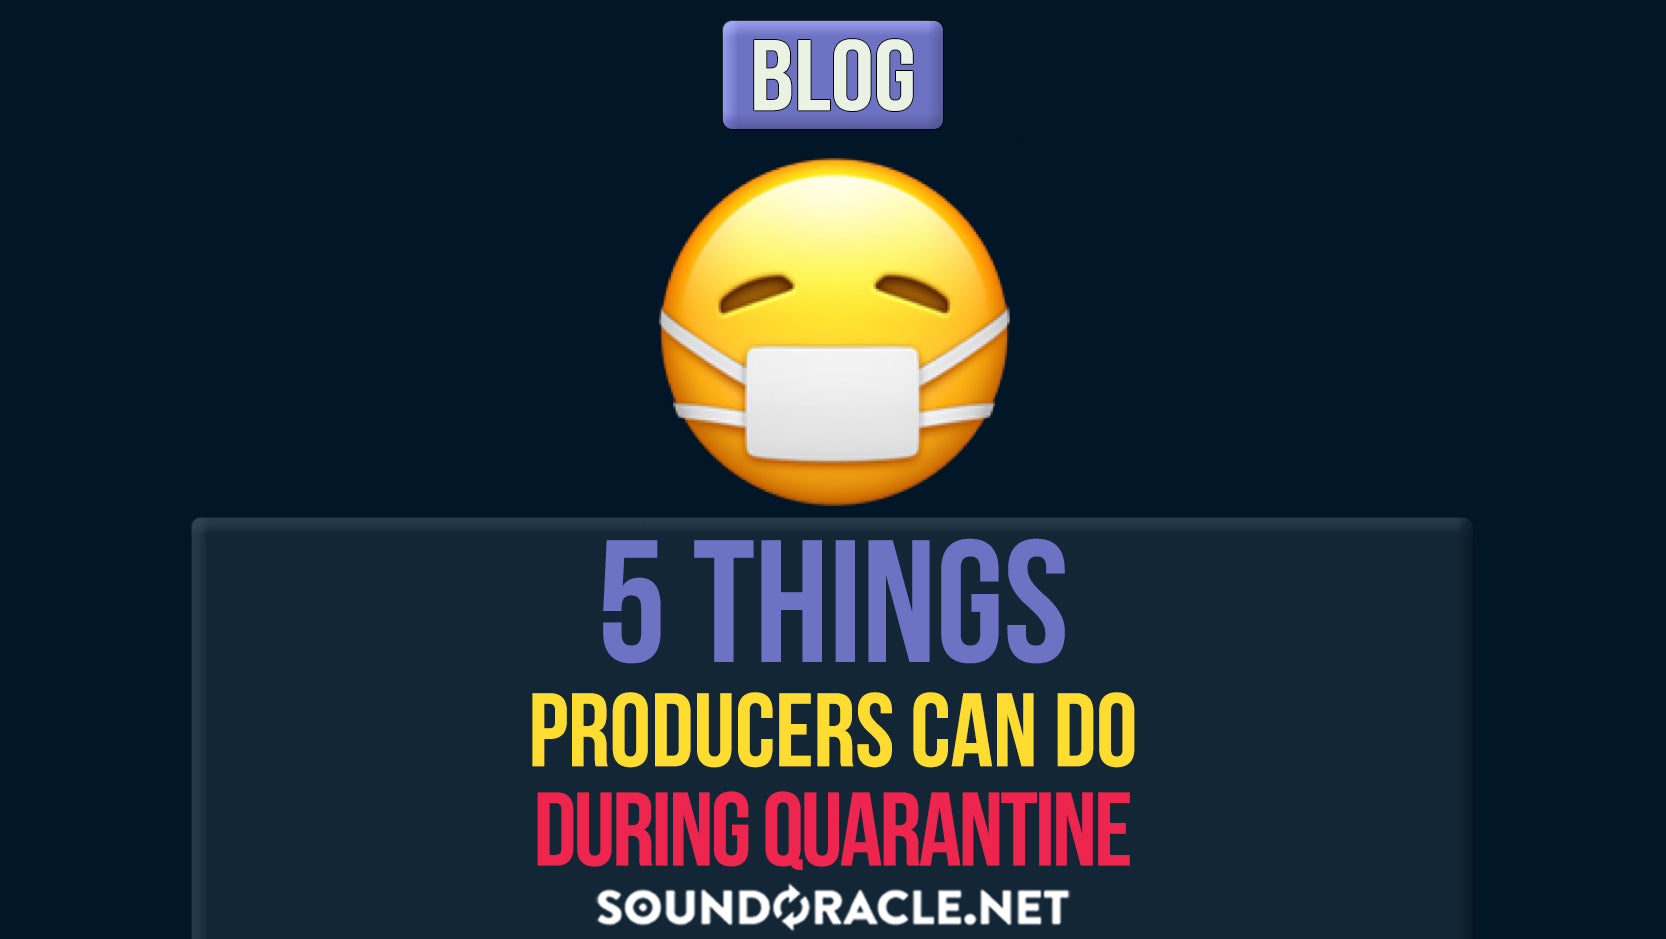 5 Things Producers Can Do During Quarantine